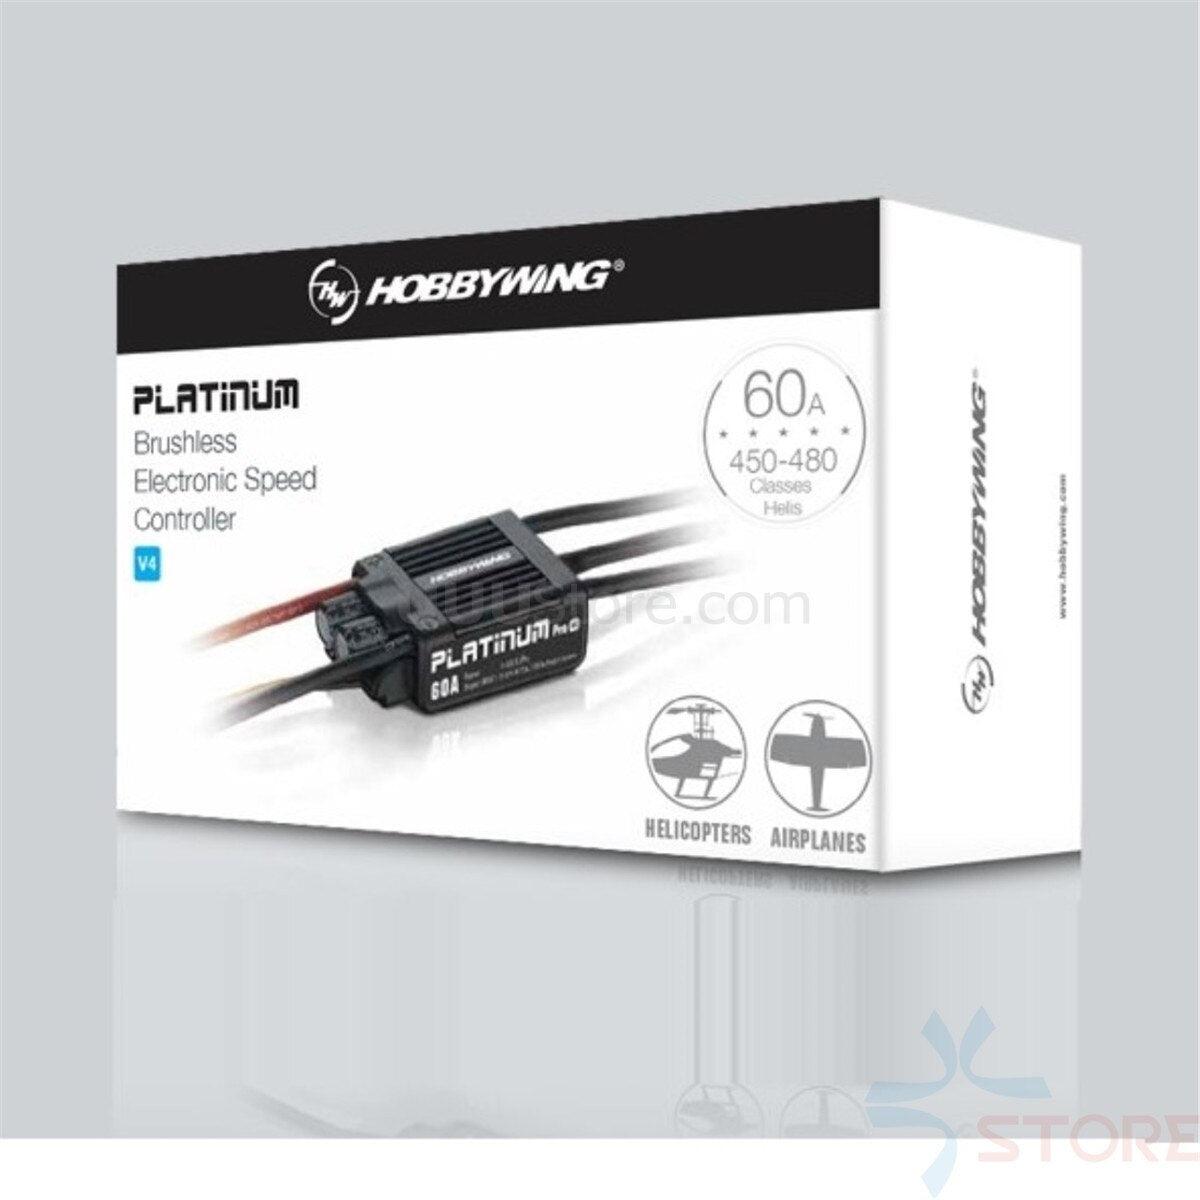 HobbyWing Platinum 80A V4  ESC, Platinum 80A ESC for 450-500 class helis/planes, supports 3S-6S batteries, BEC (10A) included.